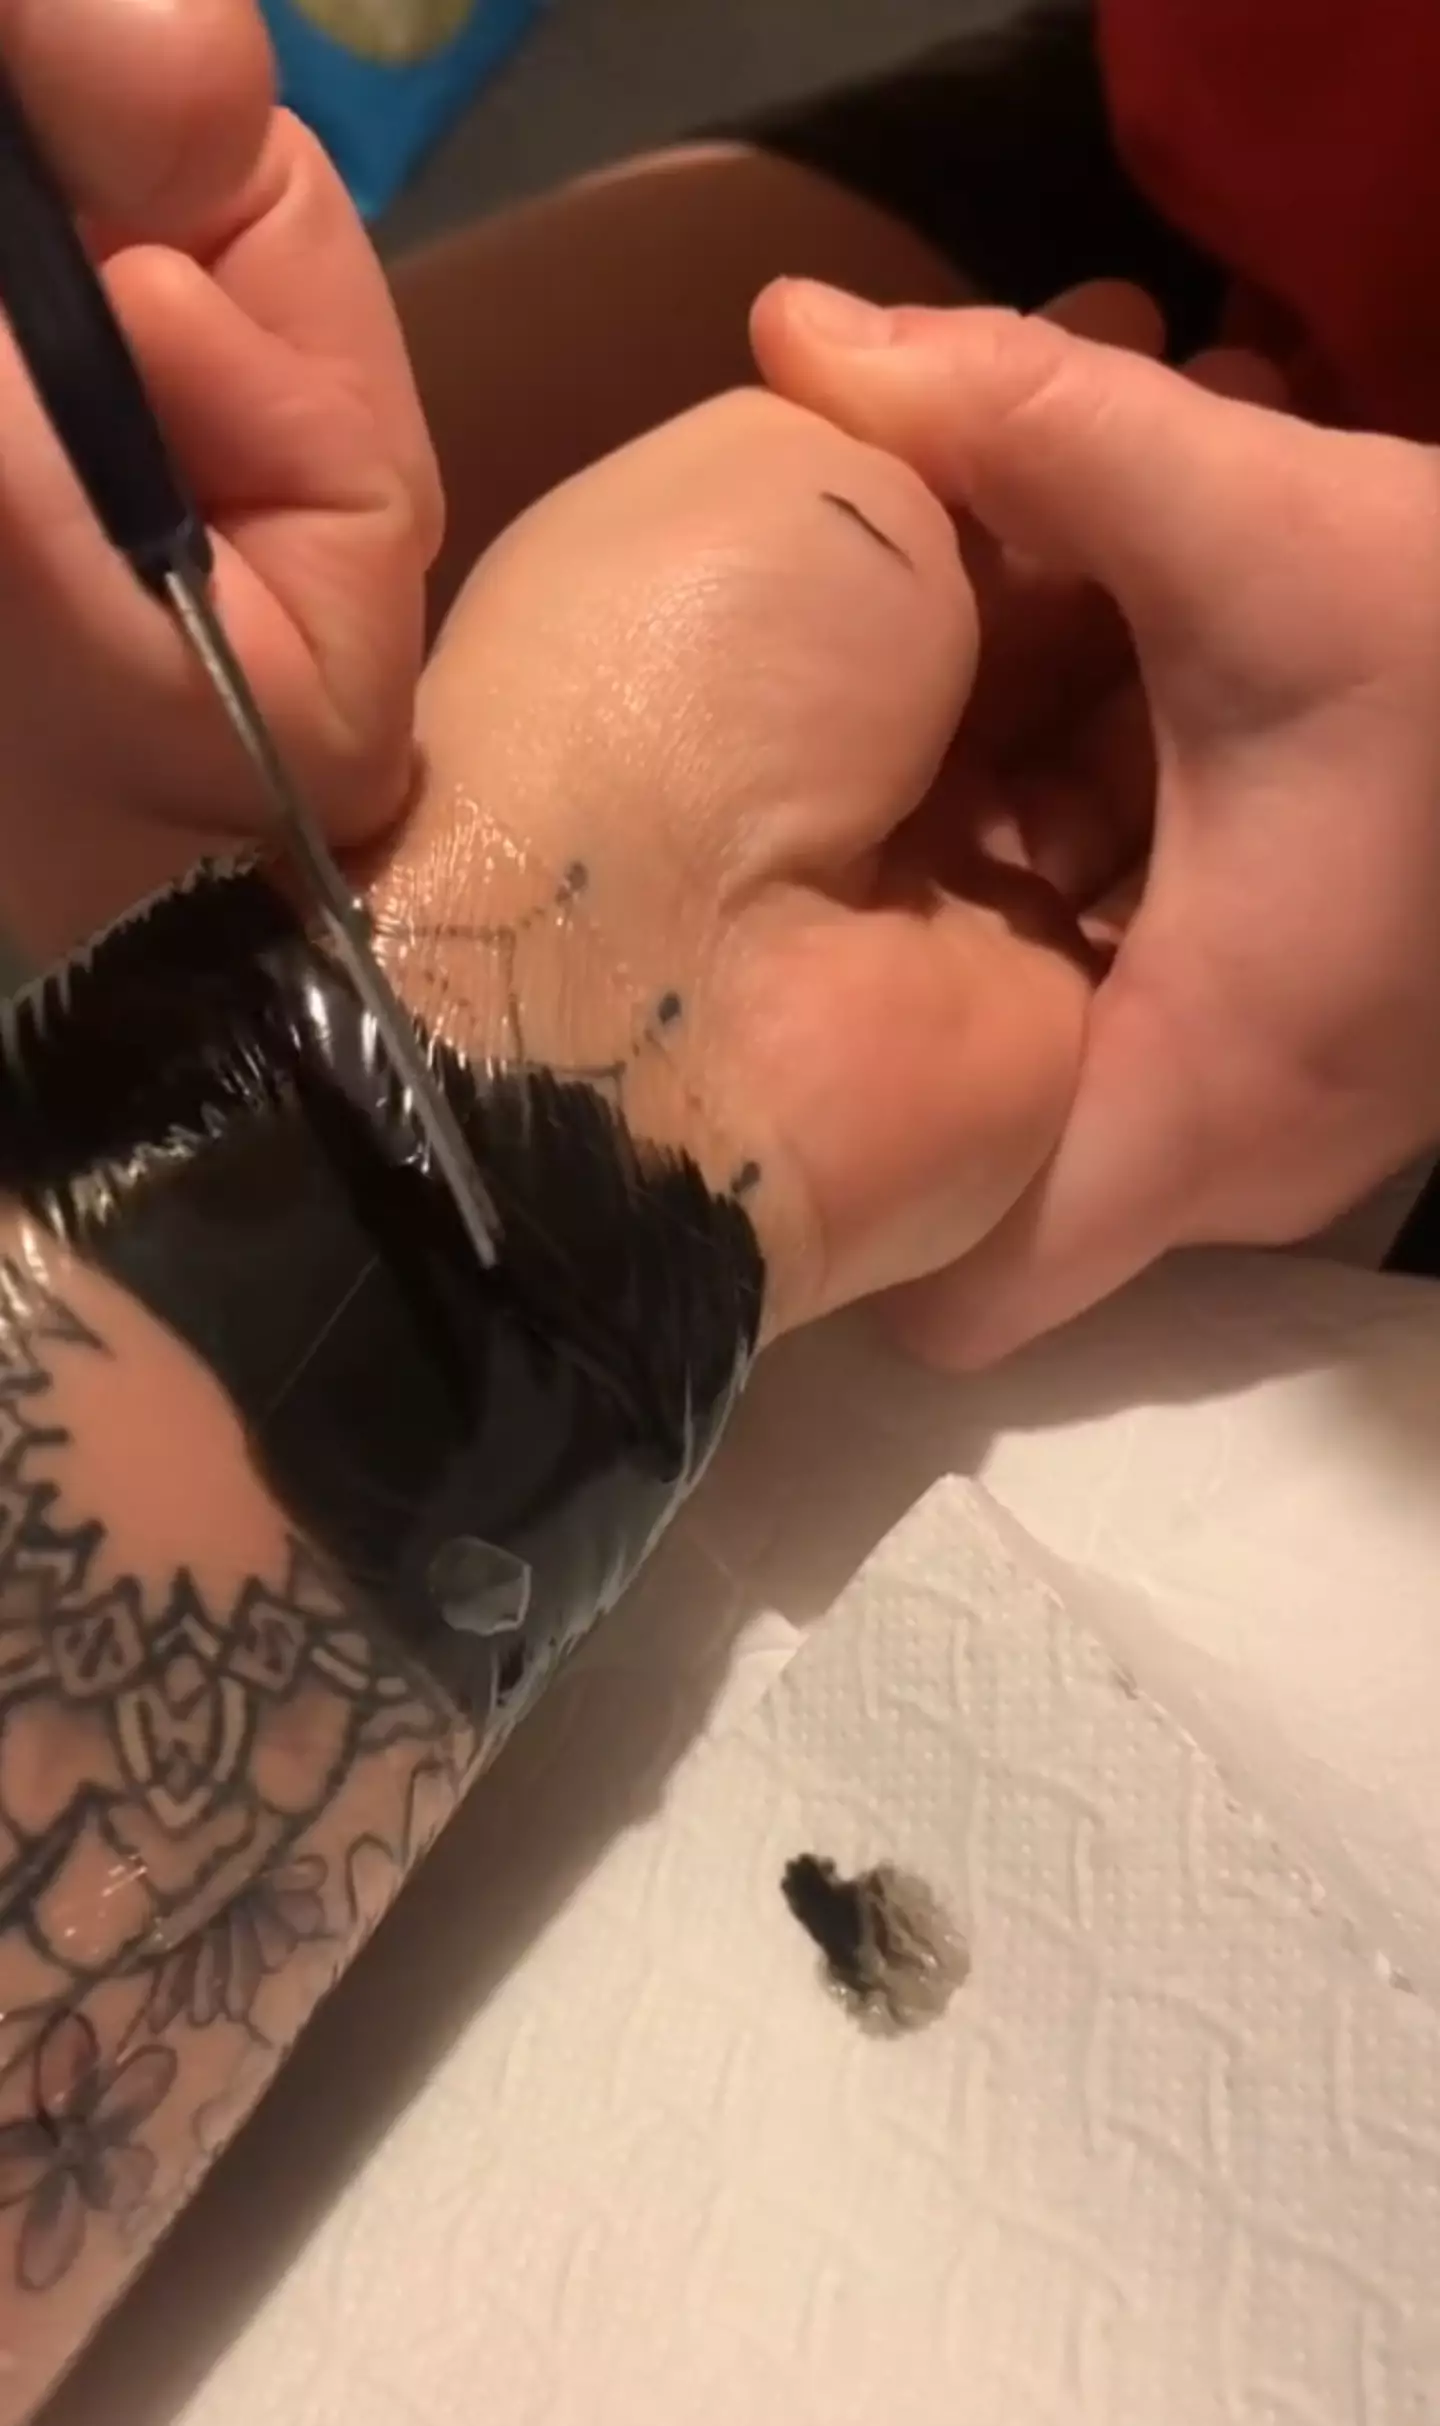 A TikTok user showed off her 'ink sack' after getting a new tattoo.